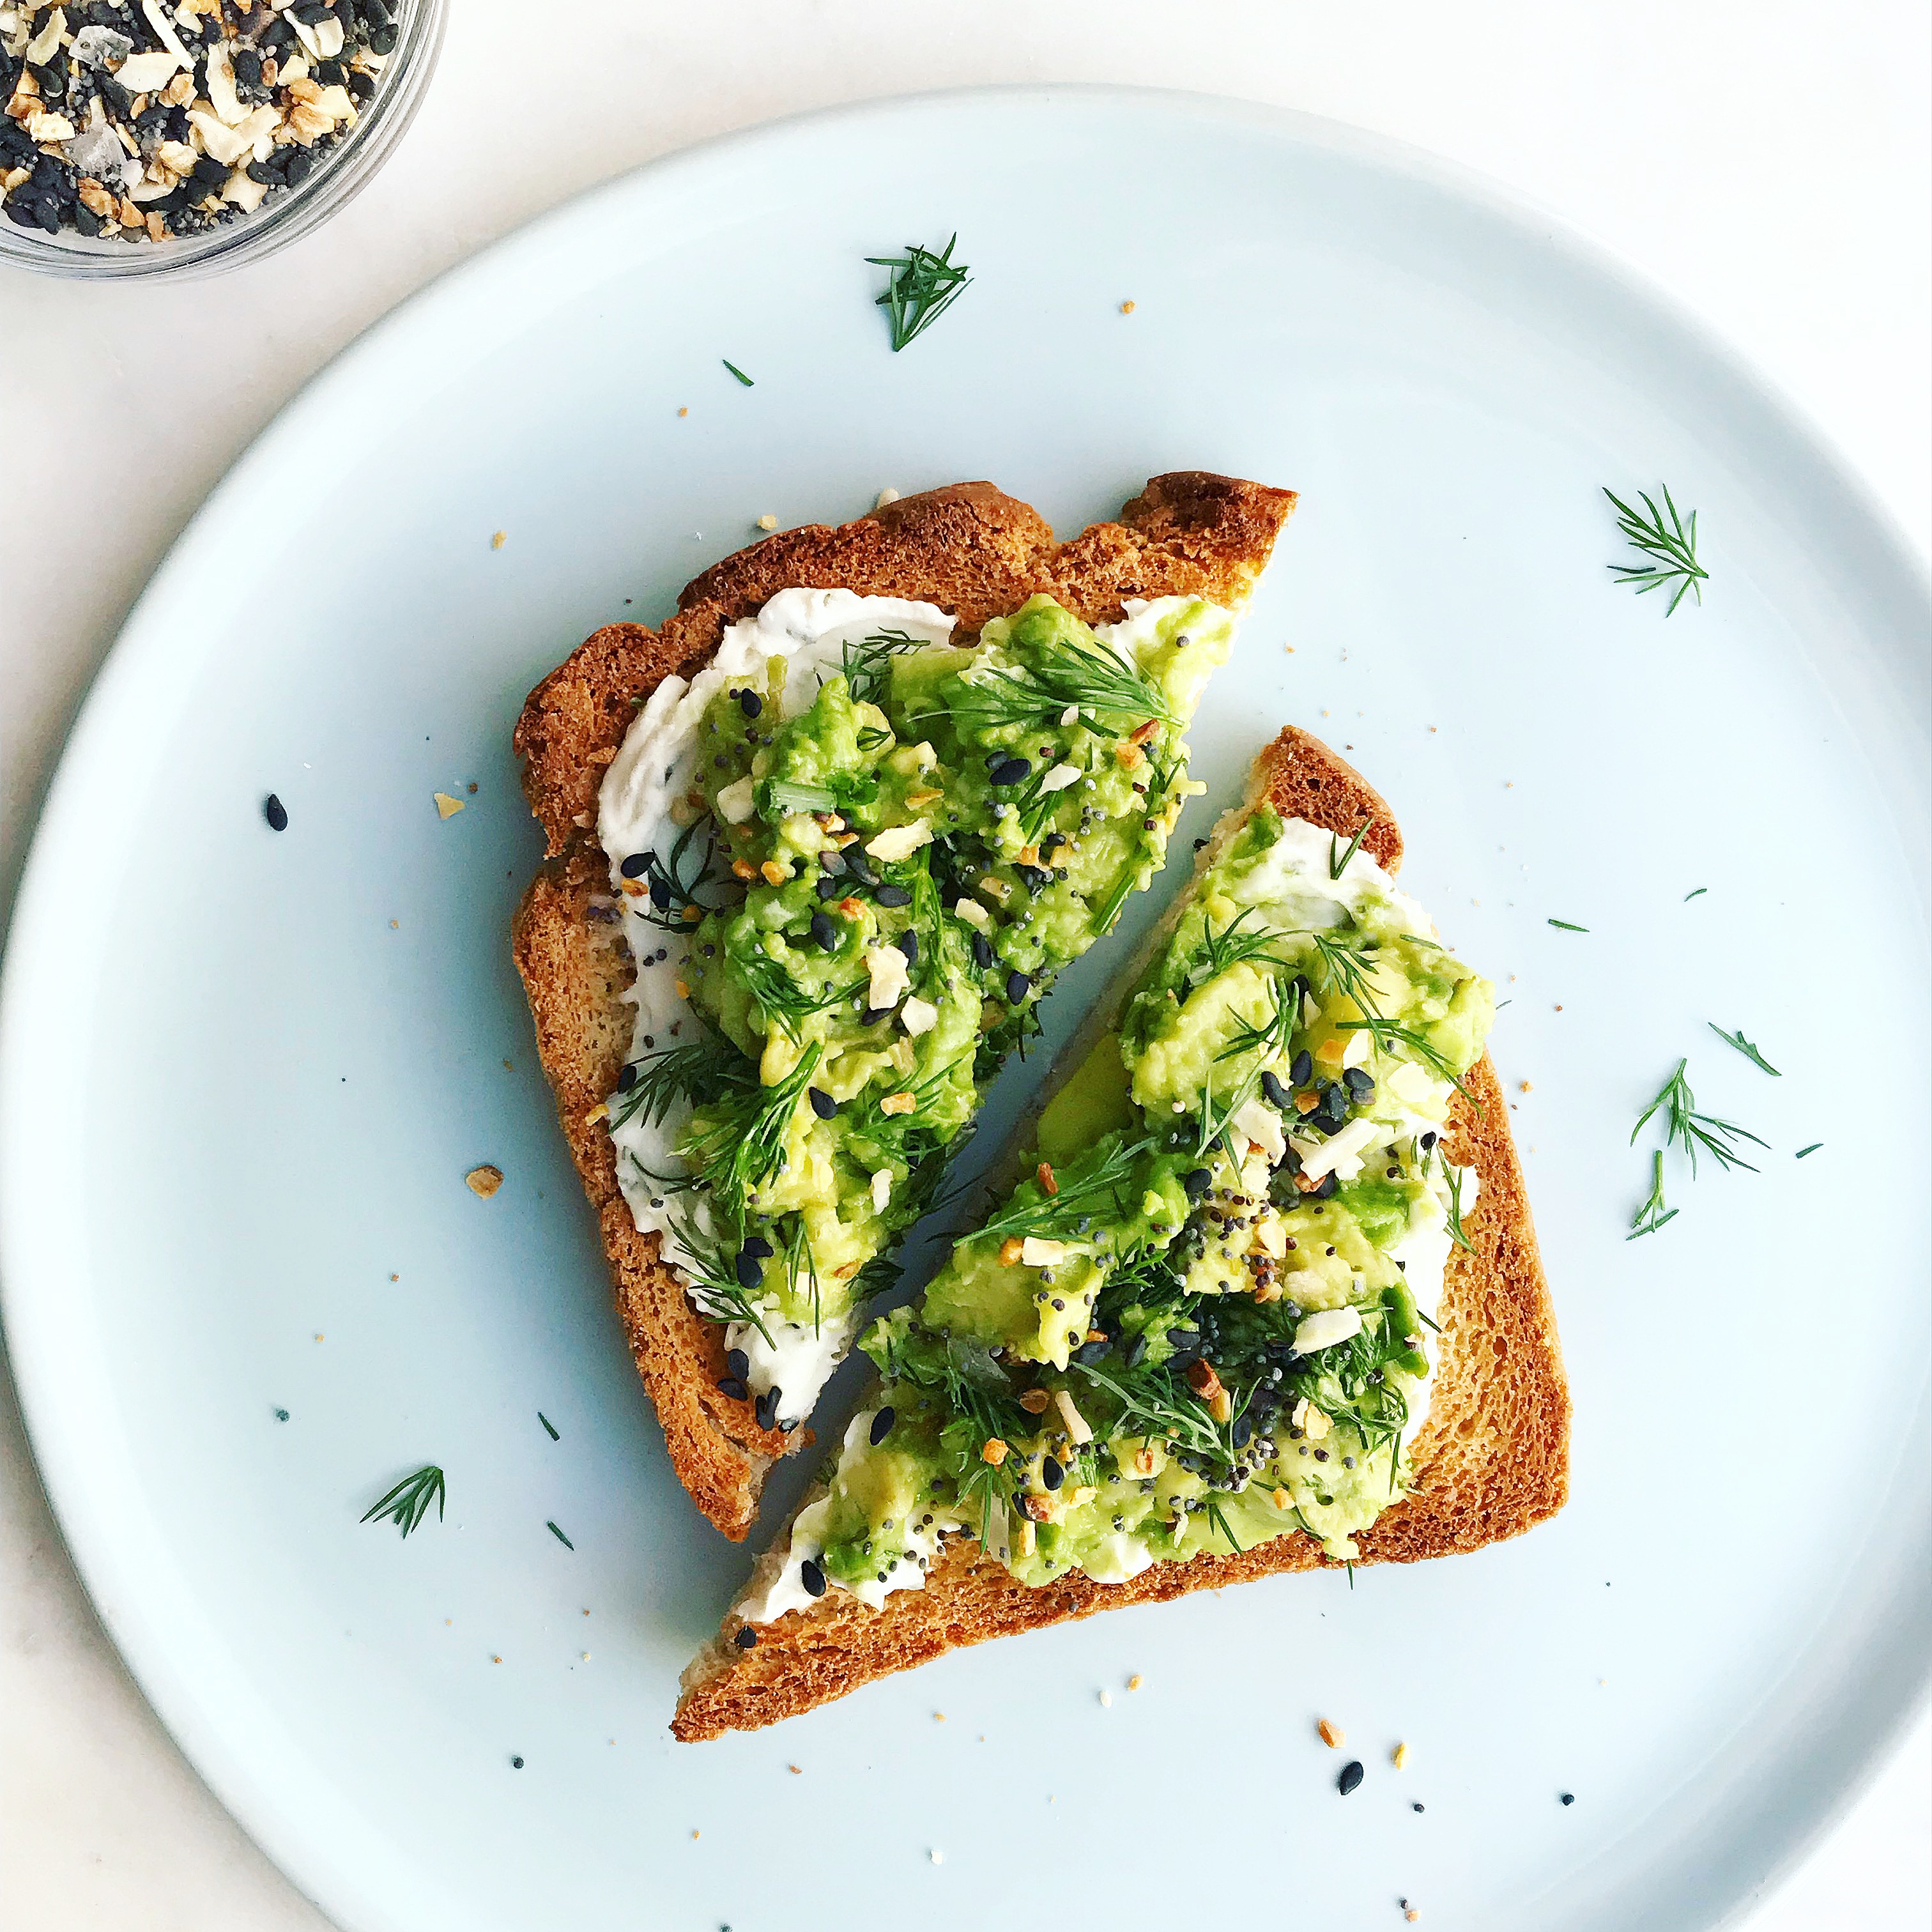 How to Build an Epic Avocado Toast